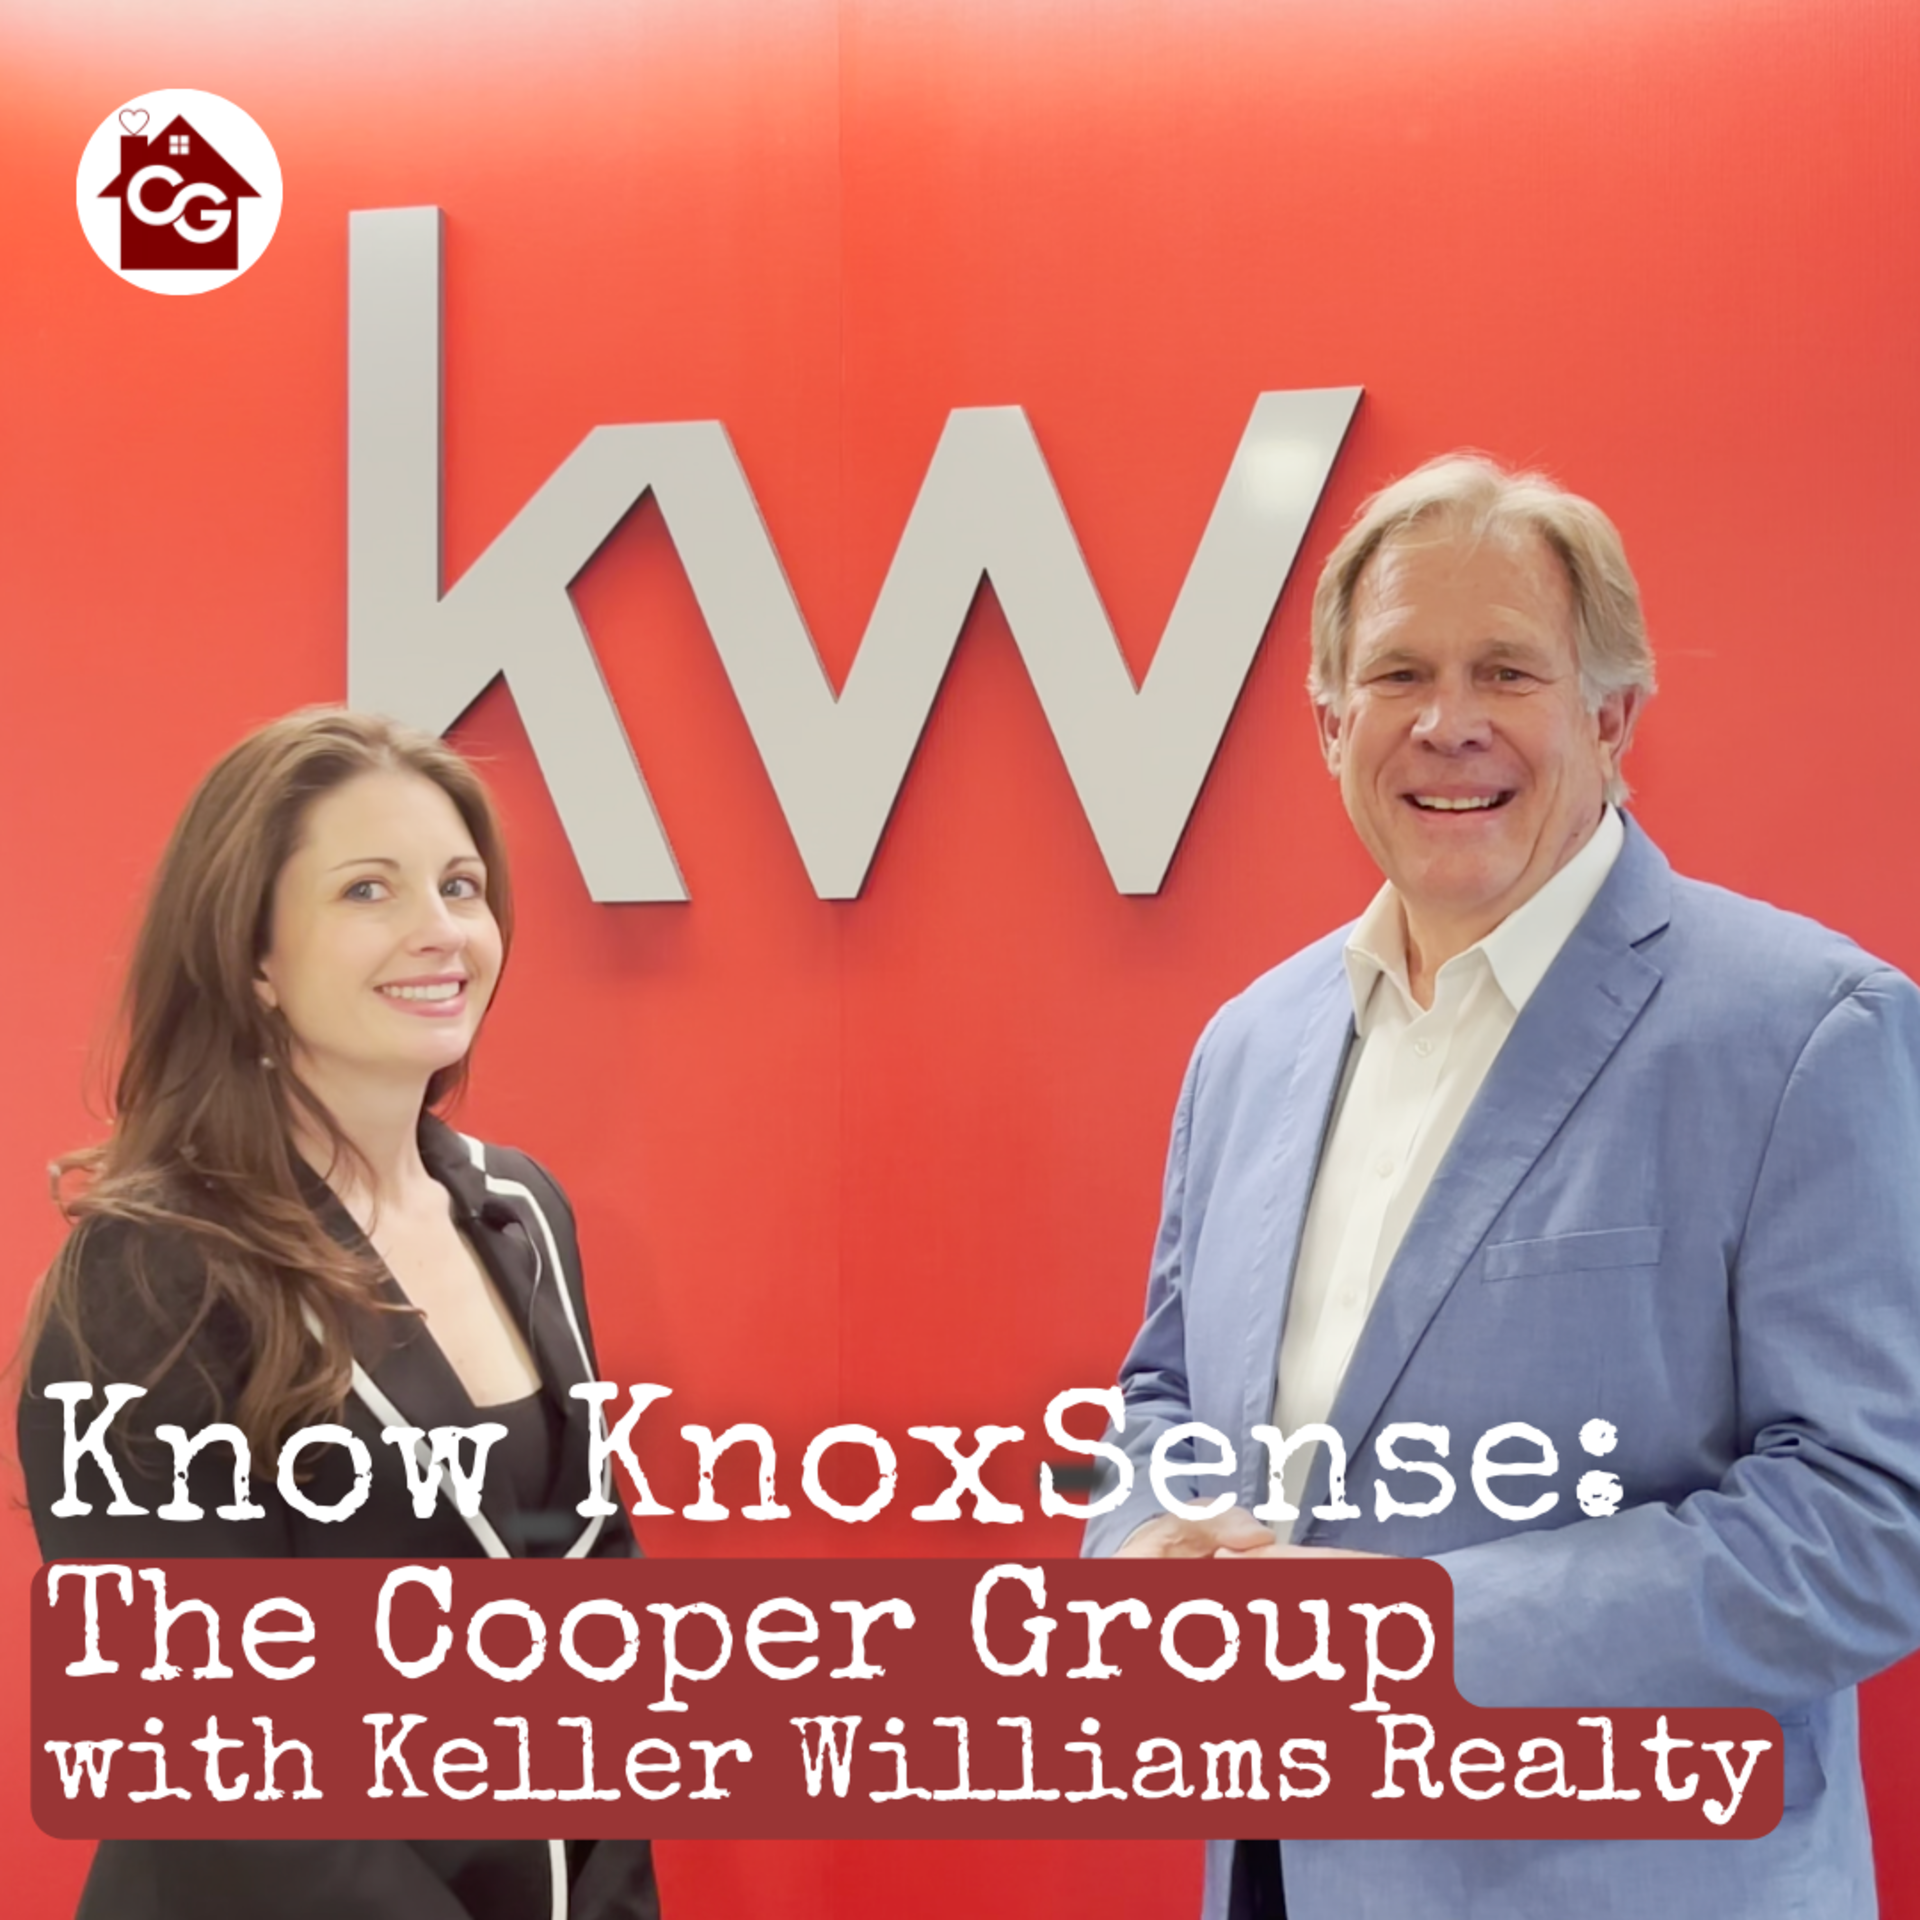 Know Knoxsense: The Cooper Group with Keller Williams Realty